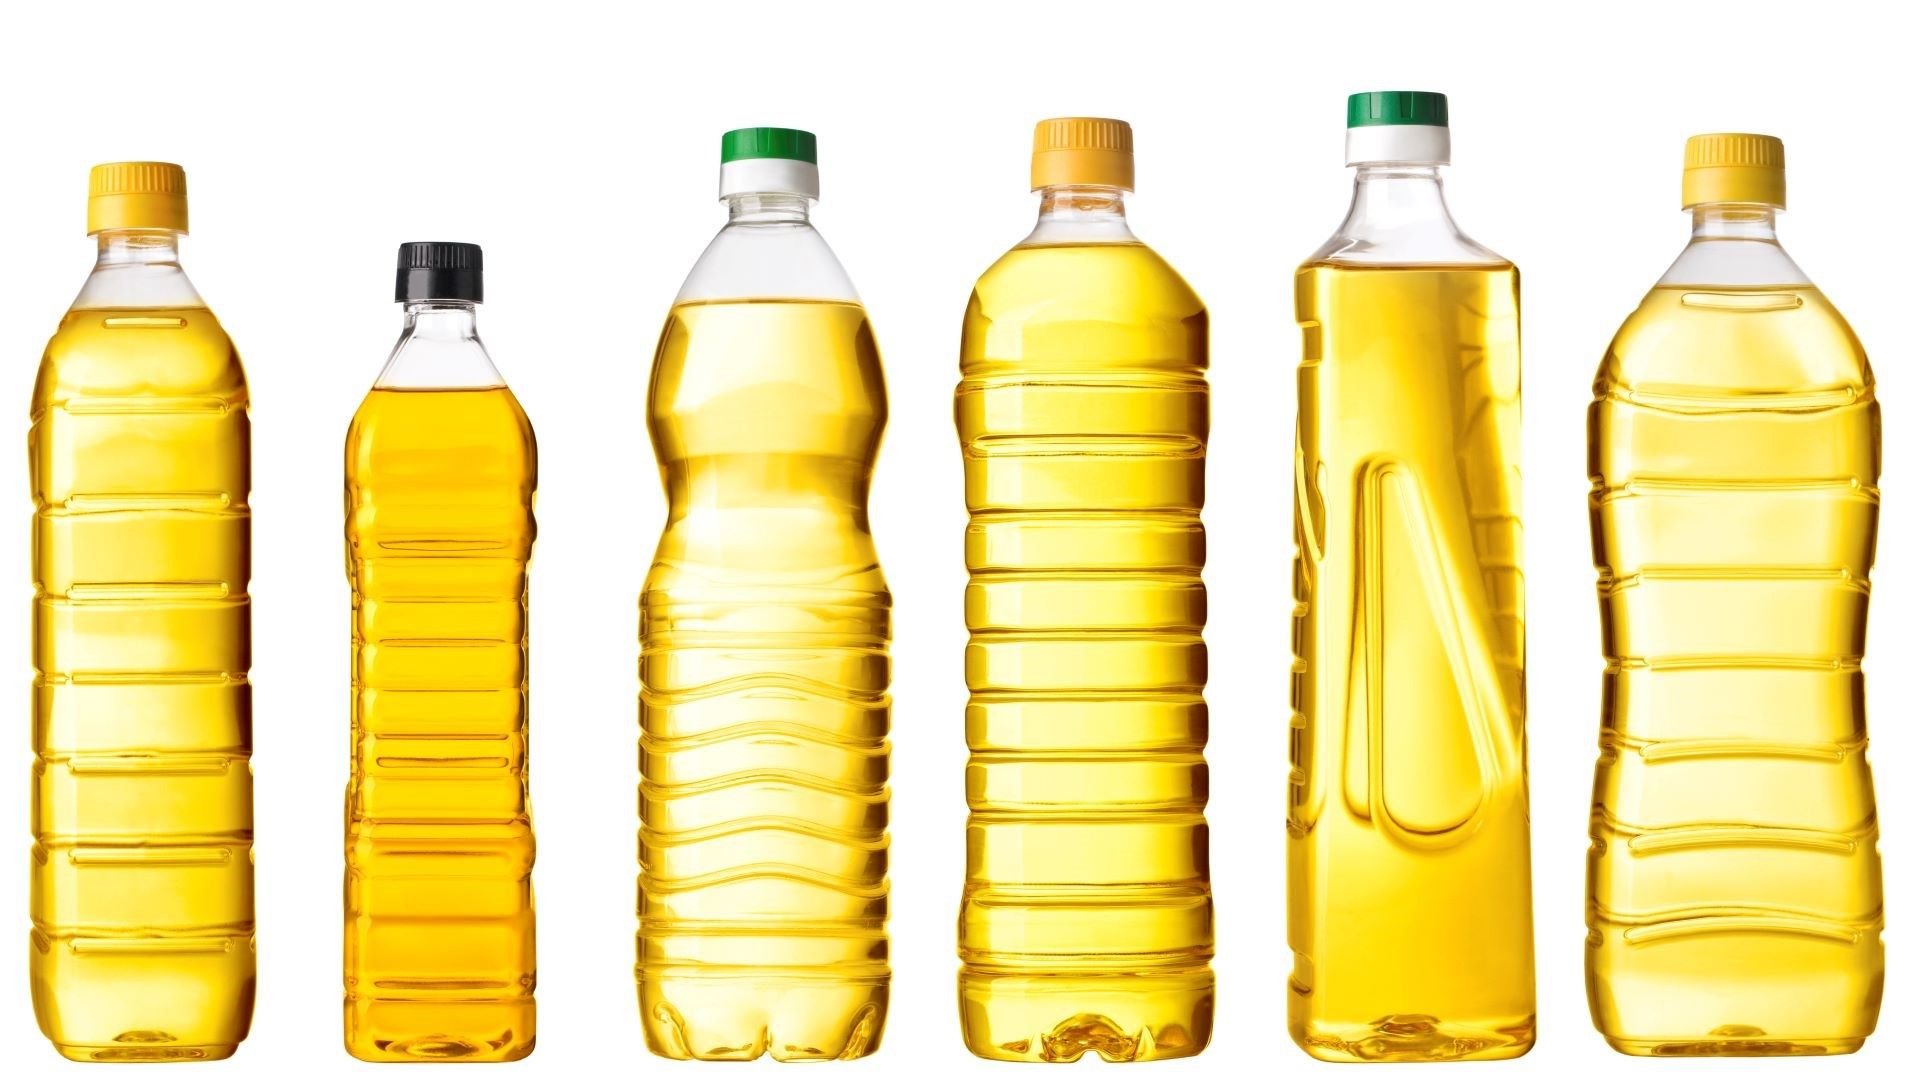 Cooking oil can now be recycled in Palmerston North